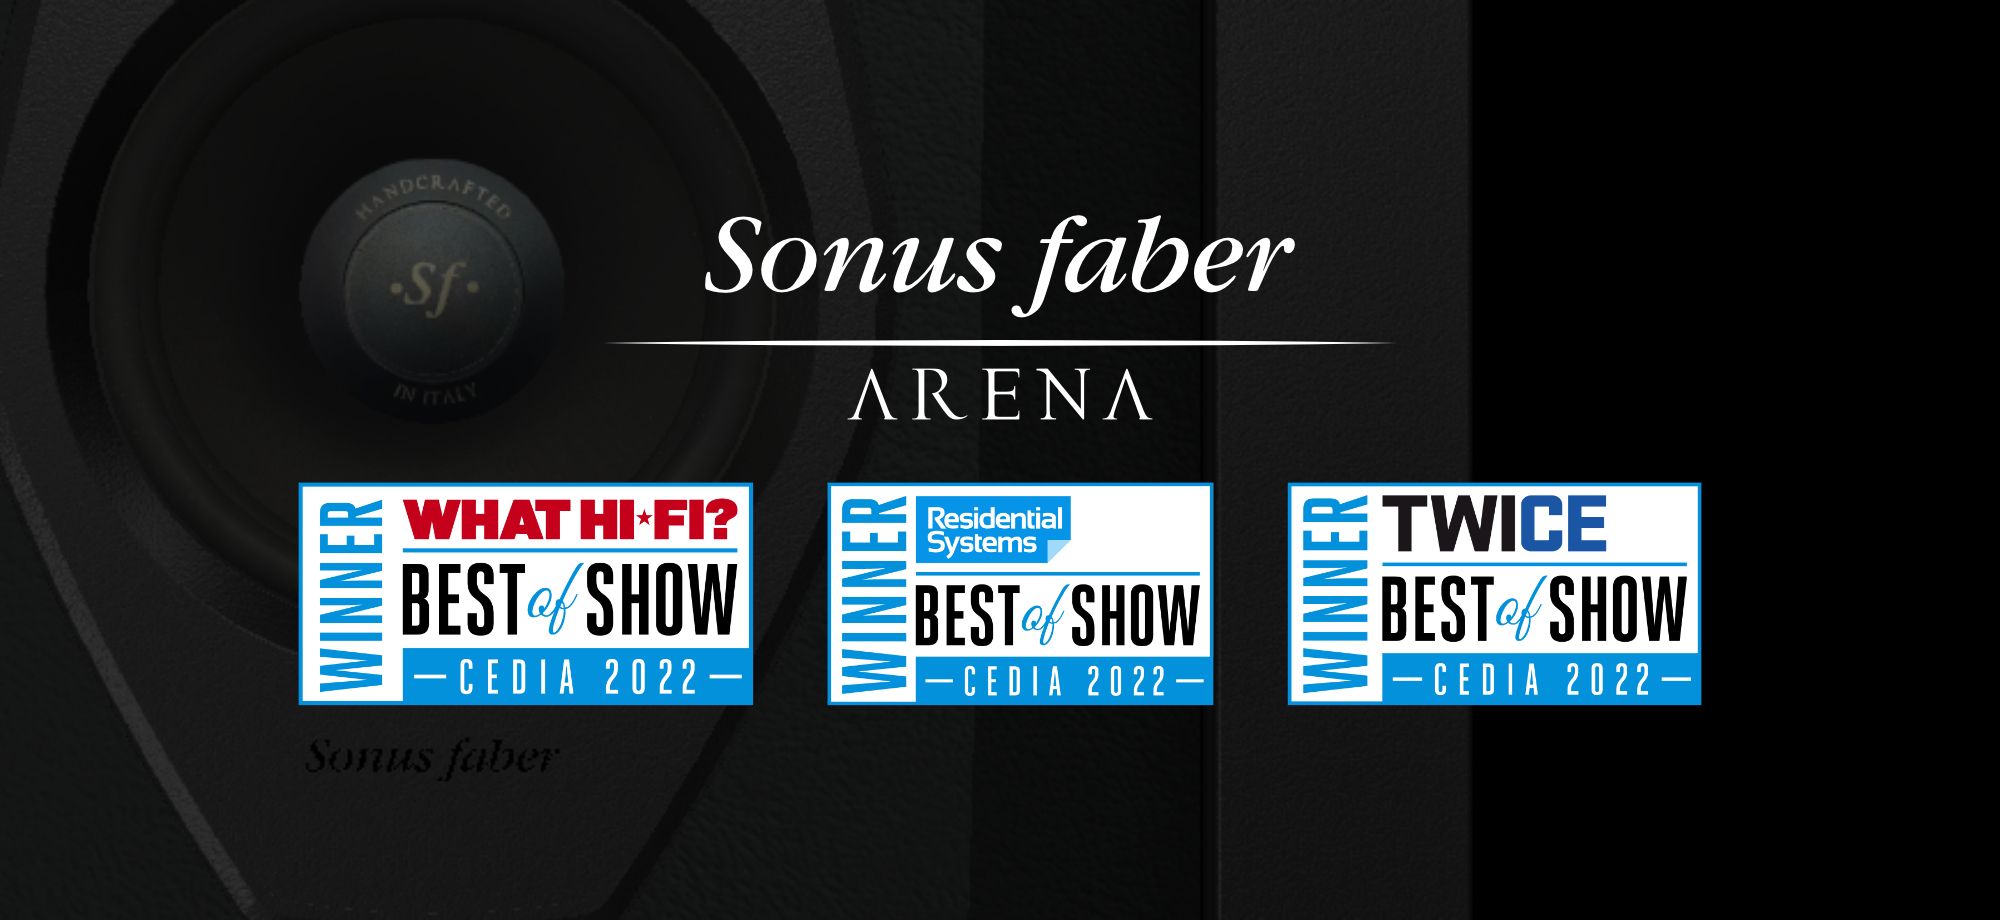 Sonus faber Arena Collection is three times CEDIA Best of show 2022 Winner